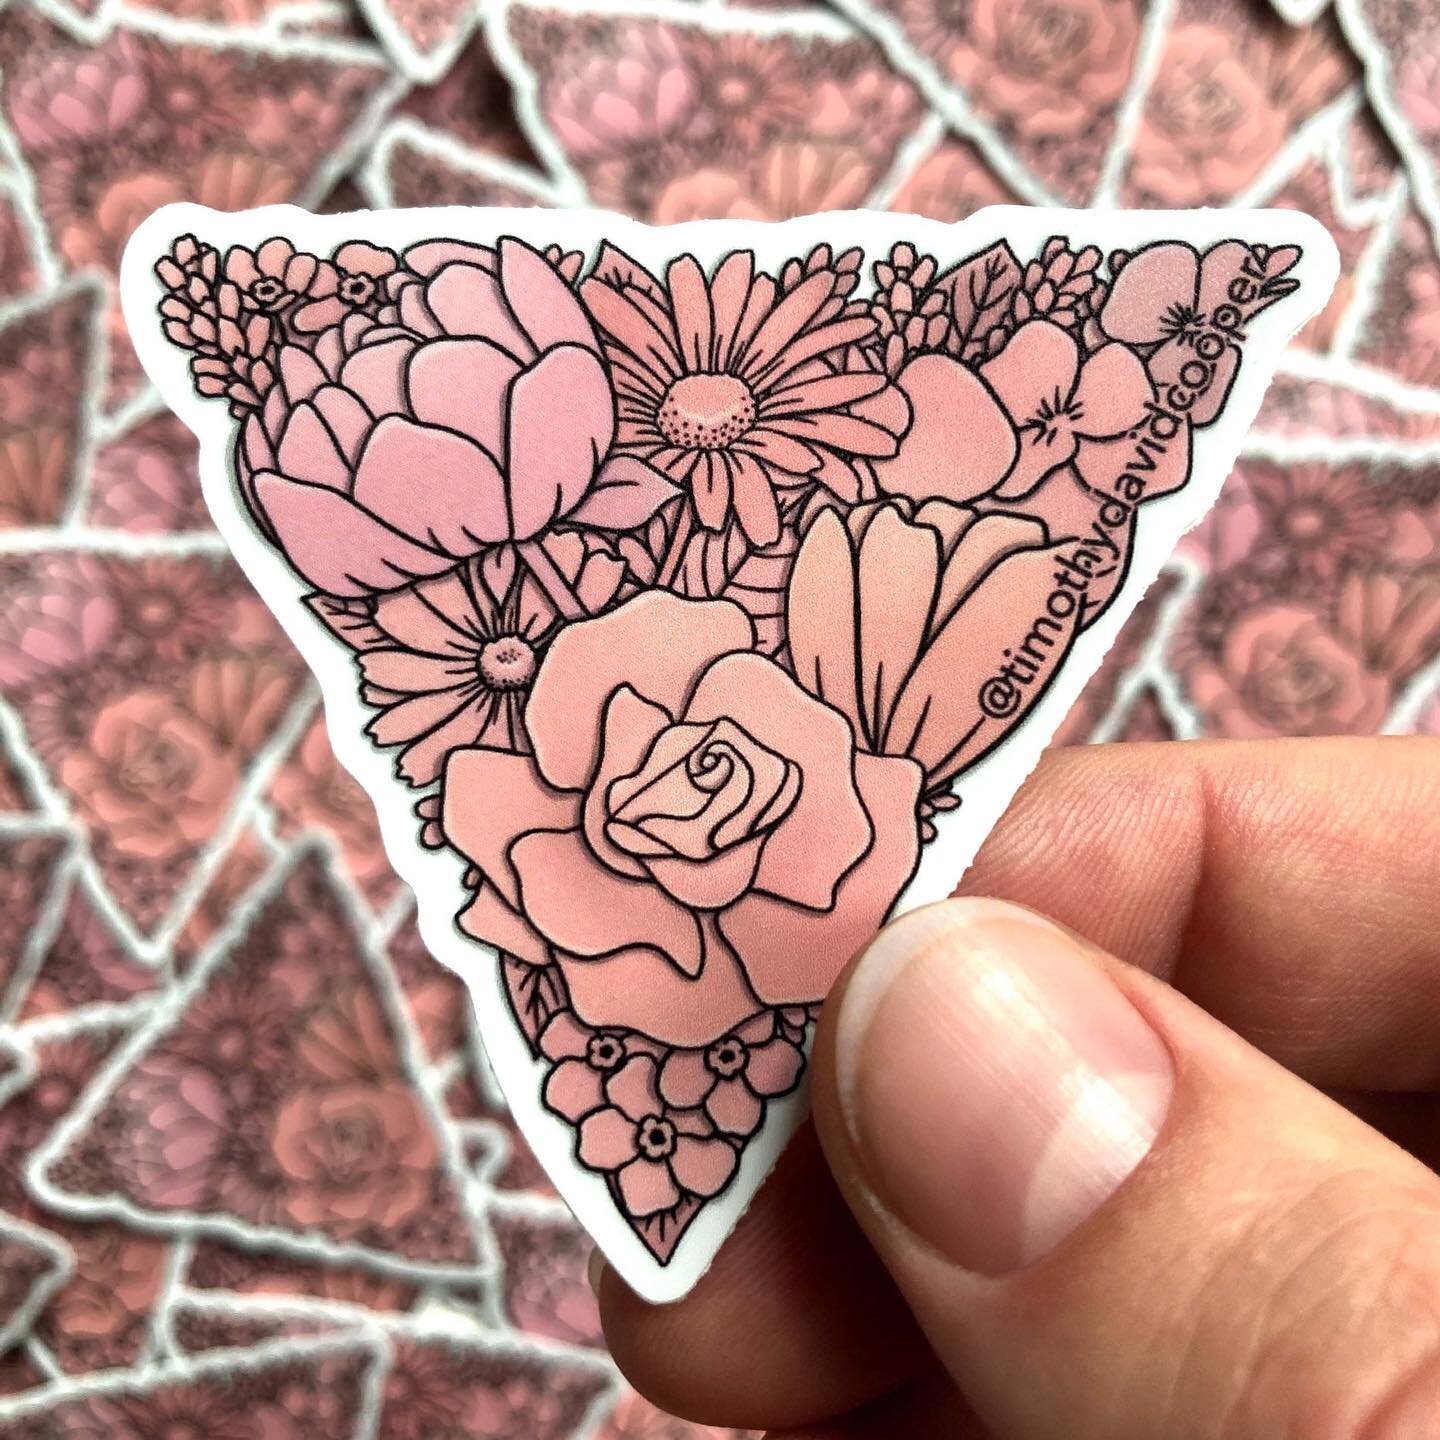 An inverted pink triangle, but make it flowers. 🌸🔻🌷 

The pink triangle has dark origins as a symbol, but Queer people know exactly how much power there is to be found in reclaiming what was once used as a tool for oppression. One of my favorite t